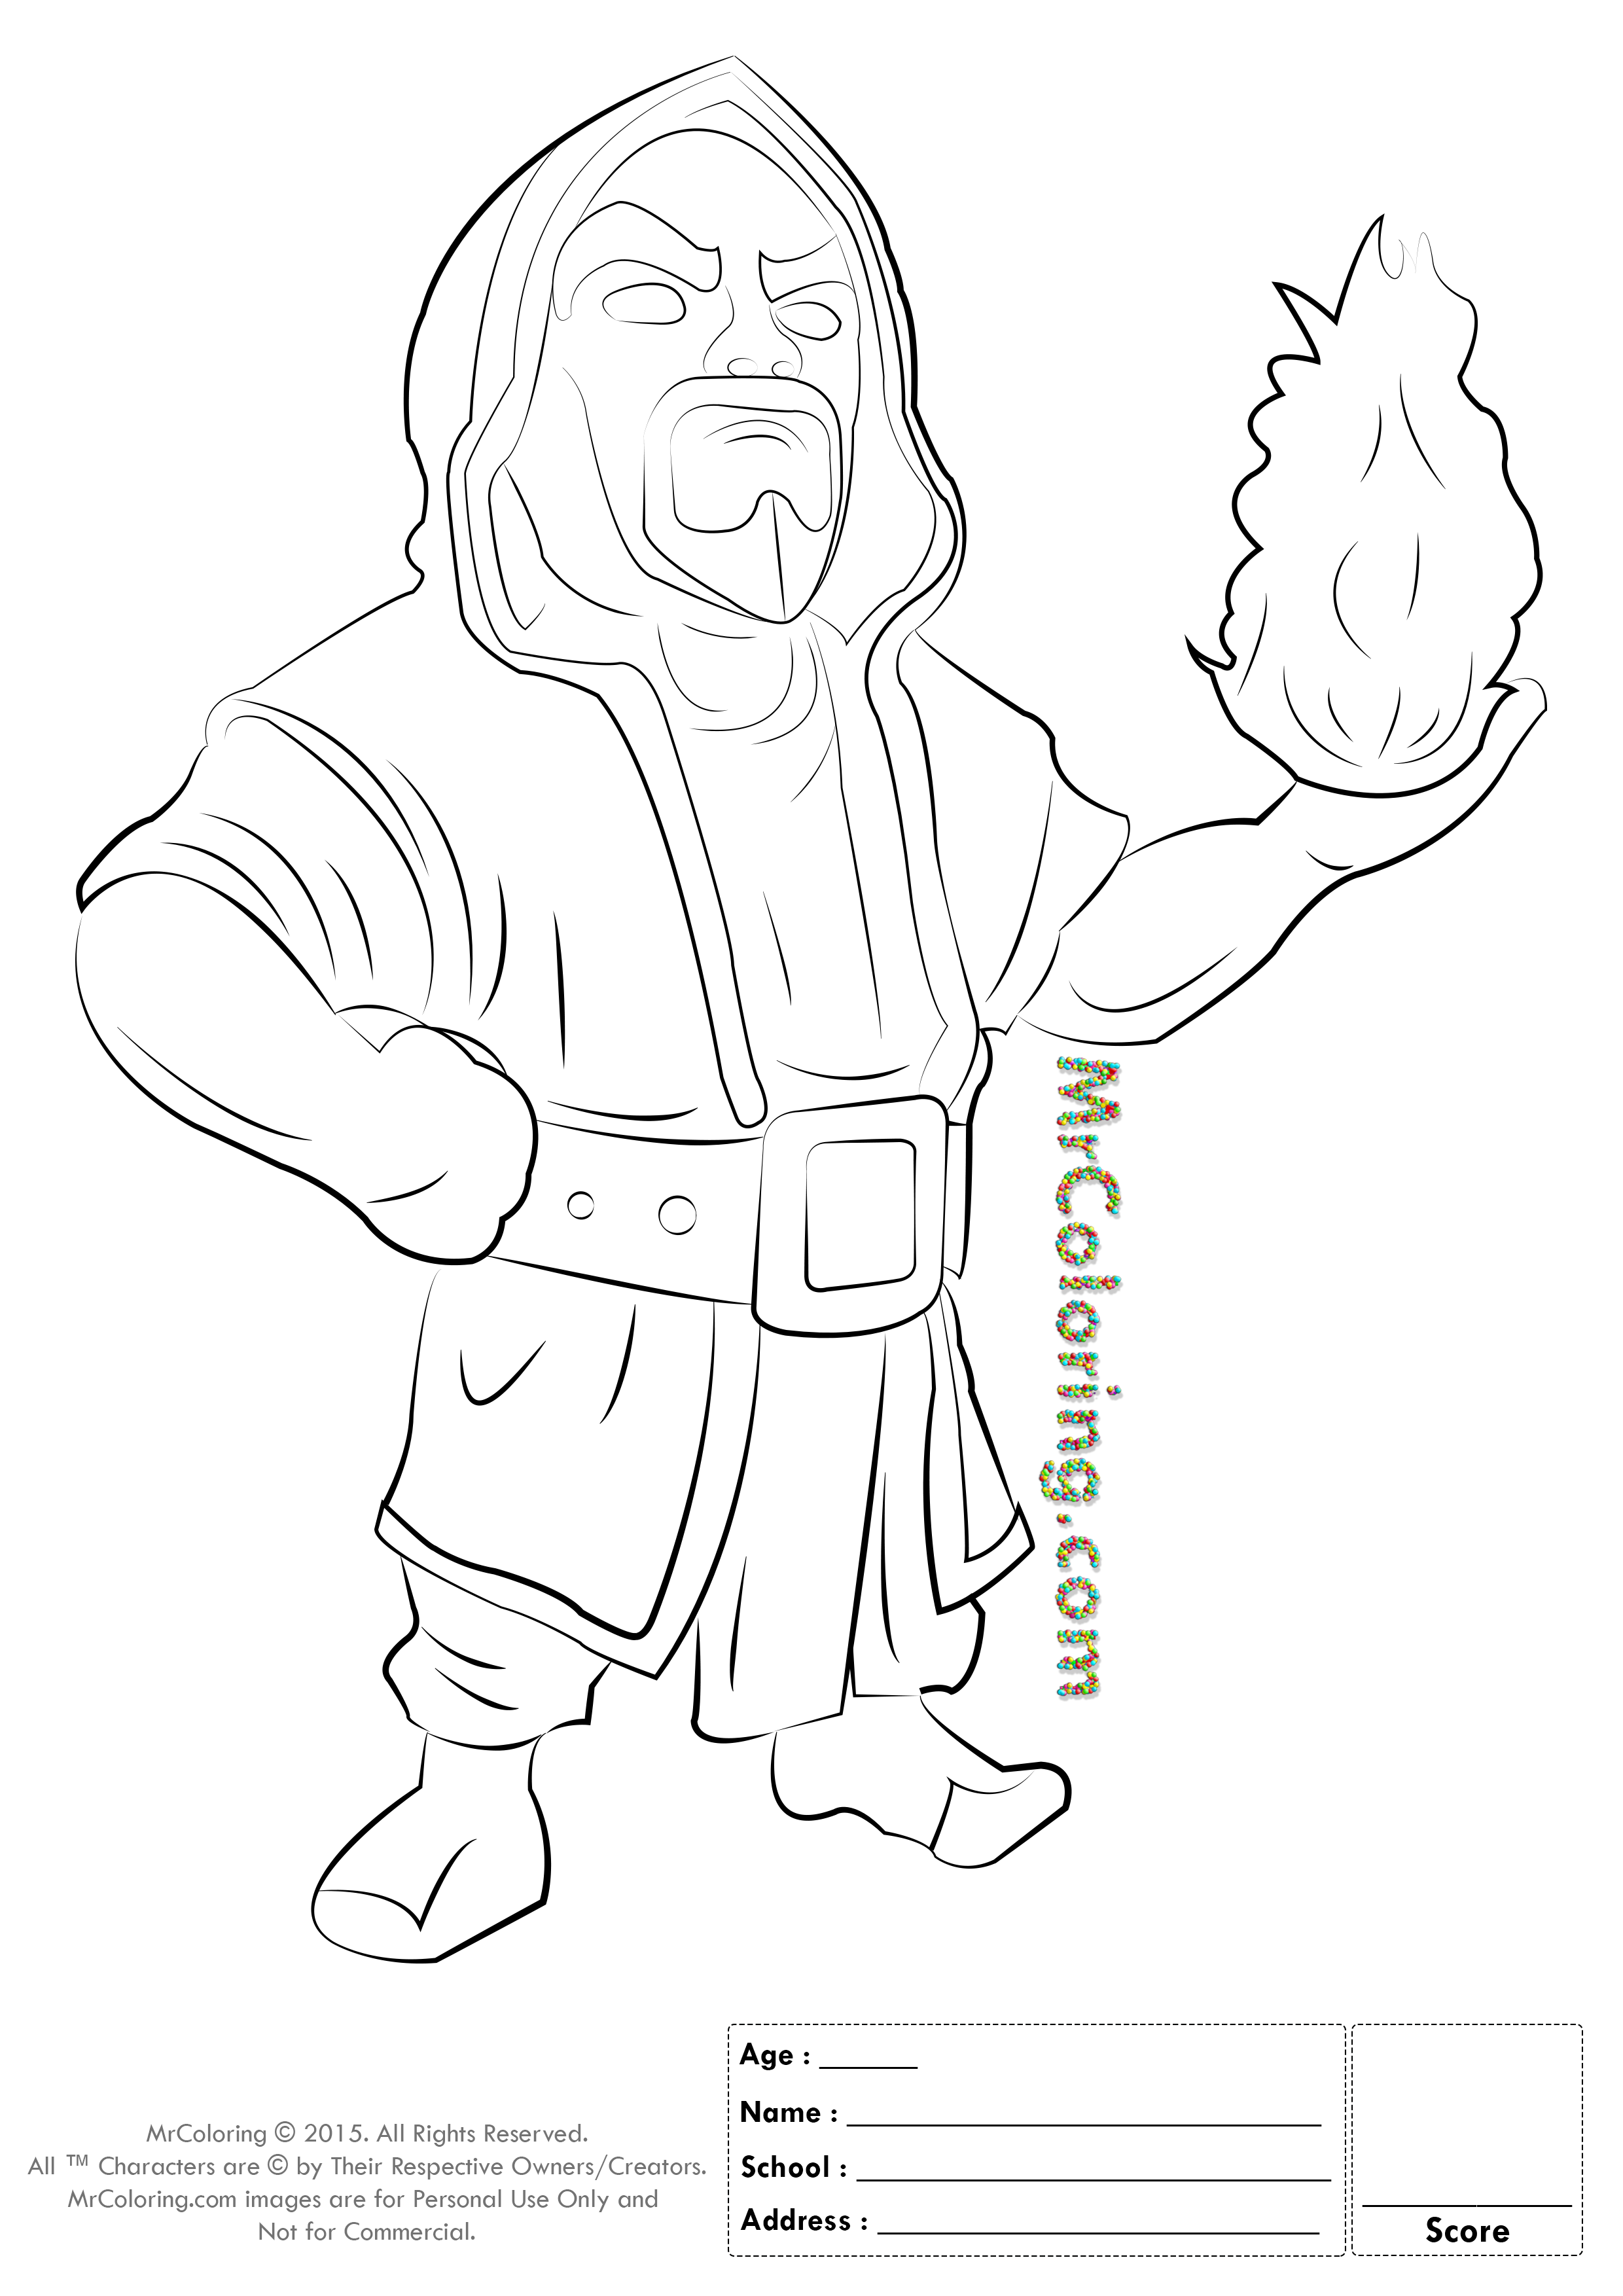 Clash Of Clans Wizard Coloring Pages 1 Clash Royale Drawings Coloring Pages Clash Royale